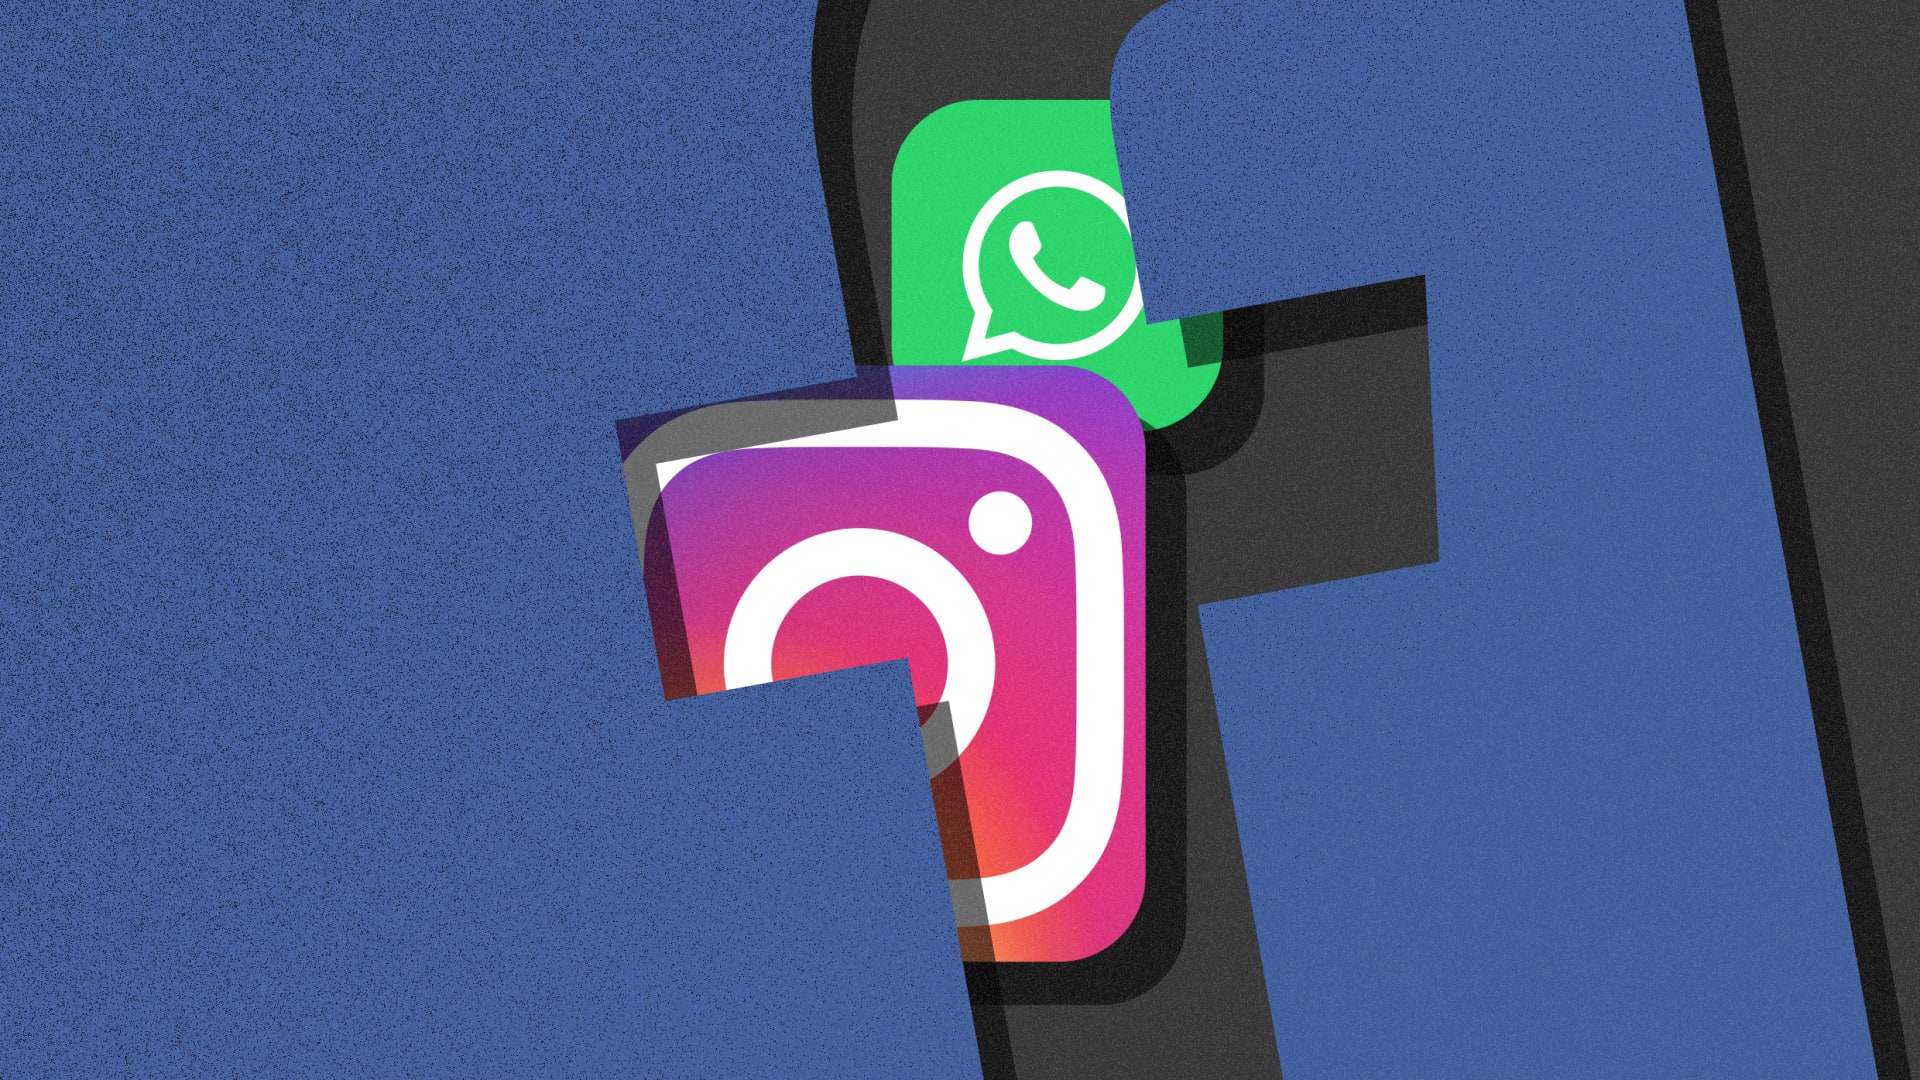 Now it’ll be “Instagram From Facebook” and “WhatsApp From Facebook”